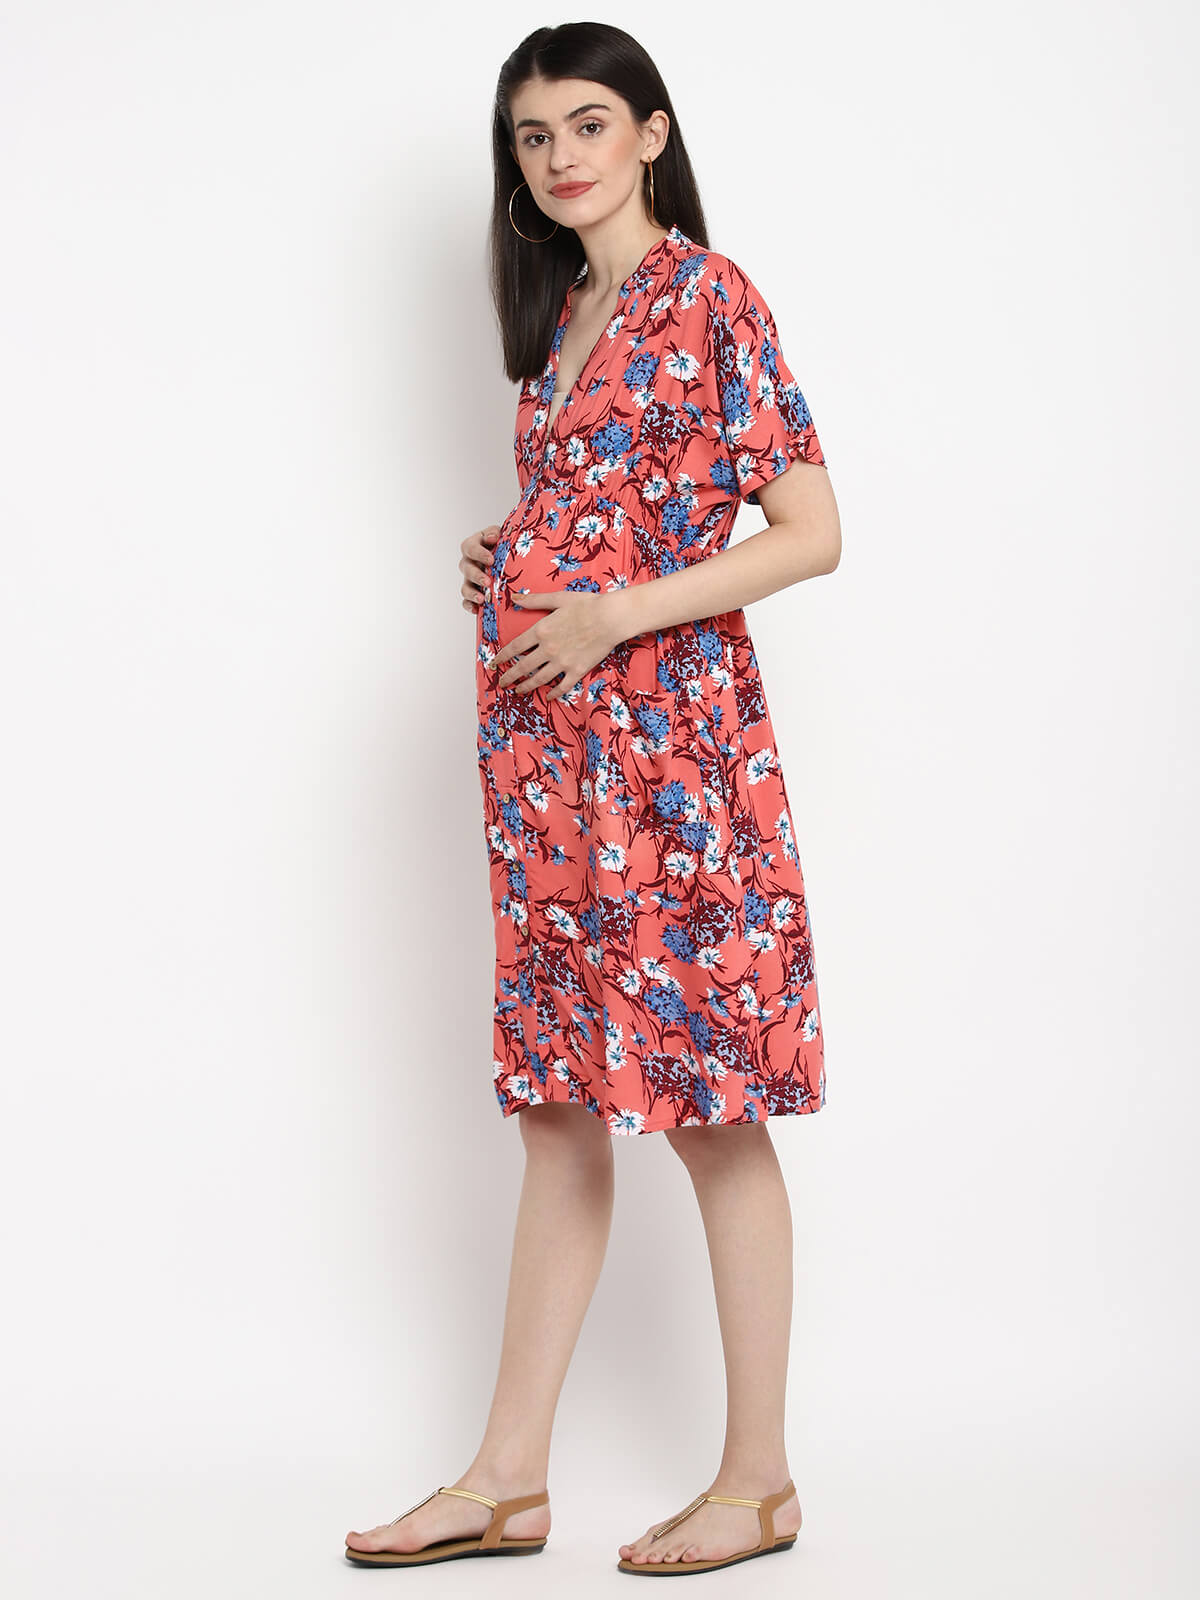 Women Maternity Dress With Adjustable Waist And Feeding Access